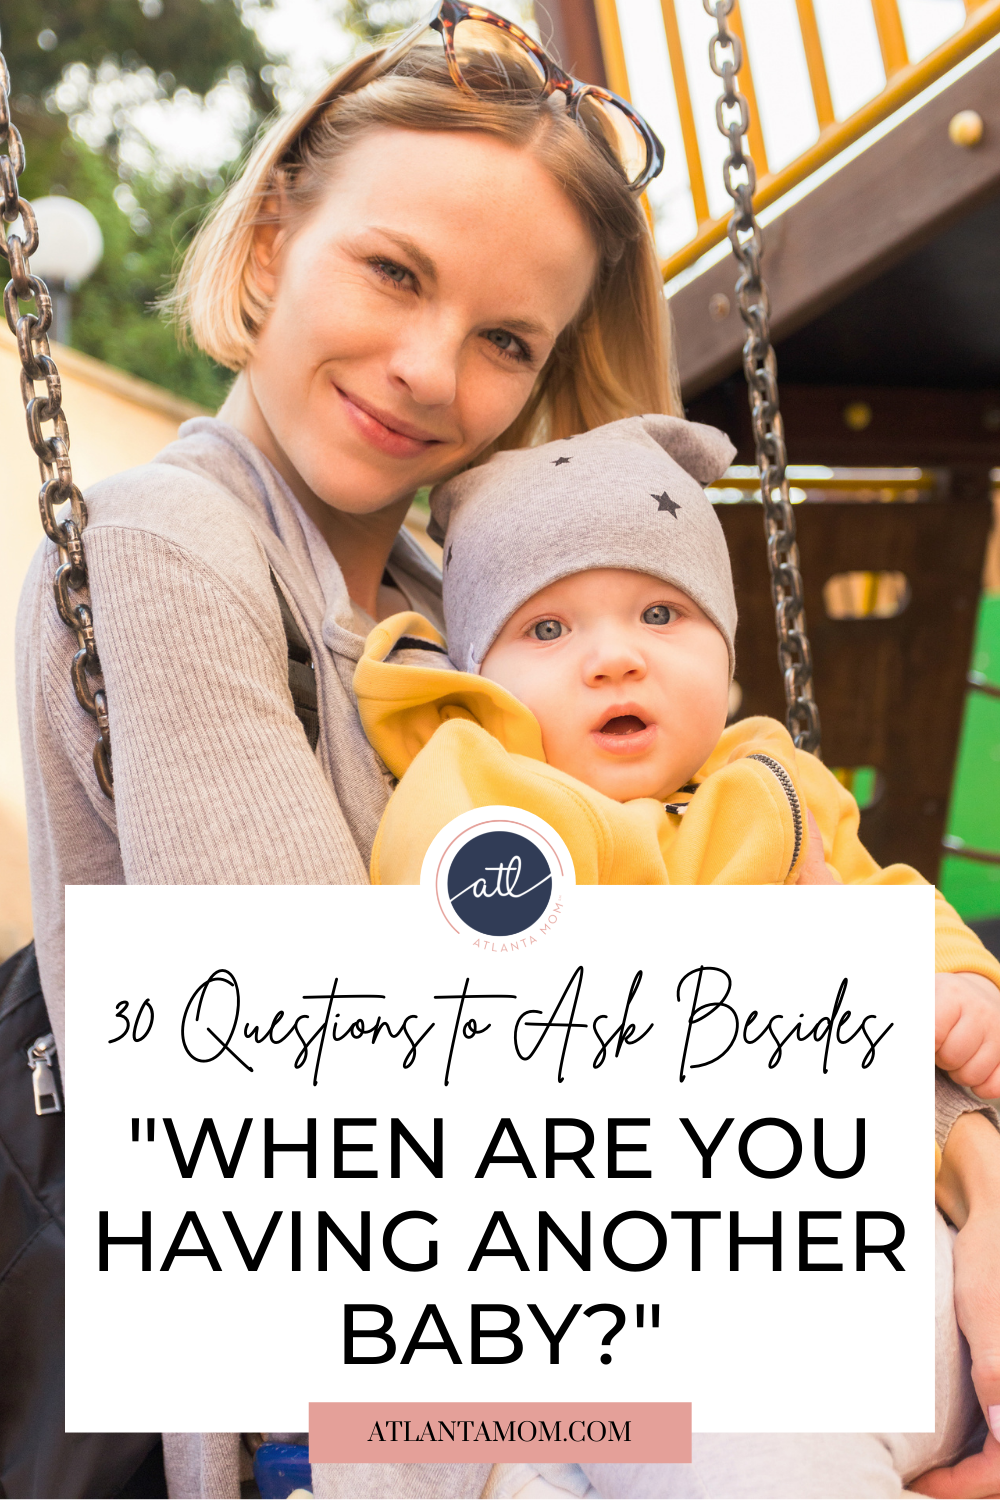 when are you having another baby?